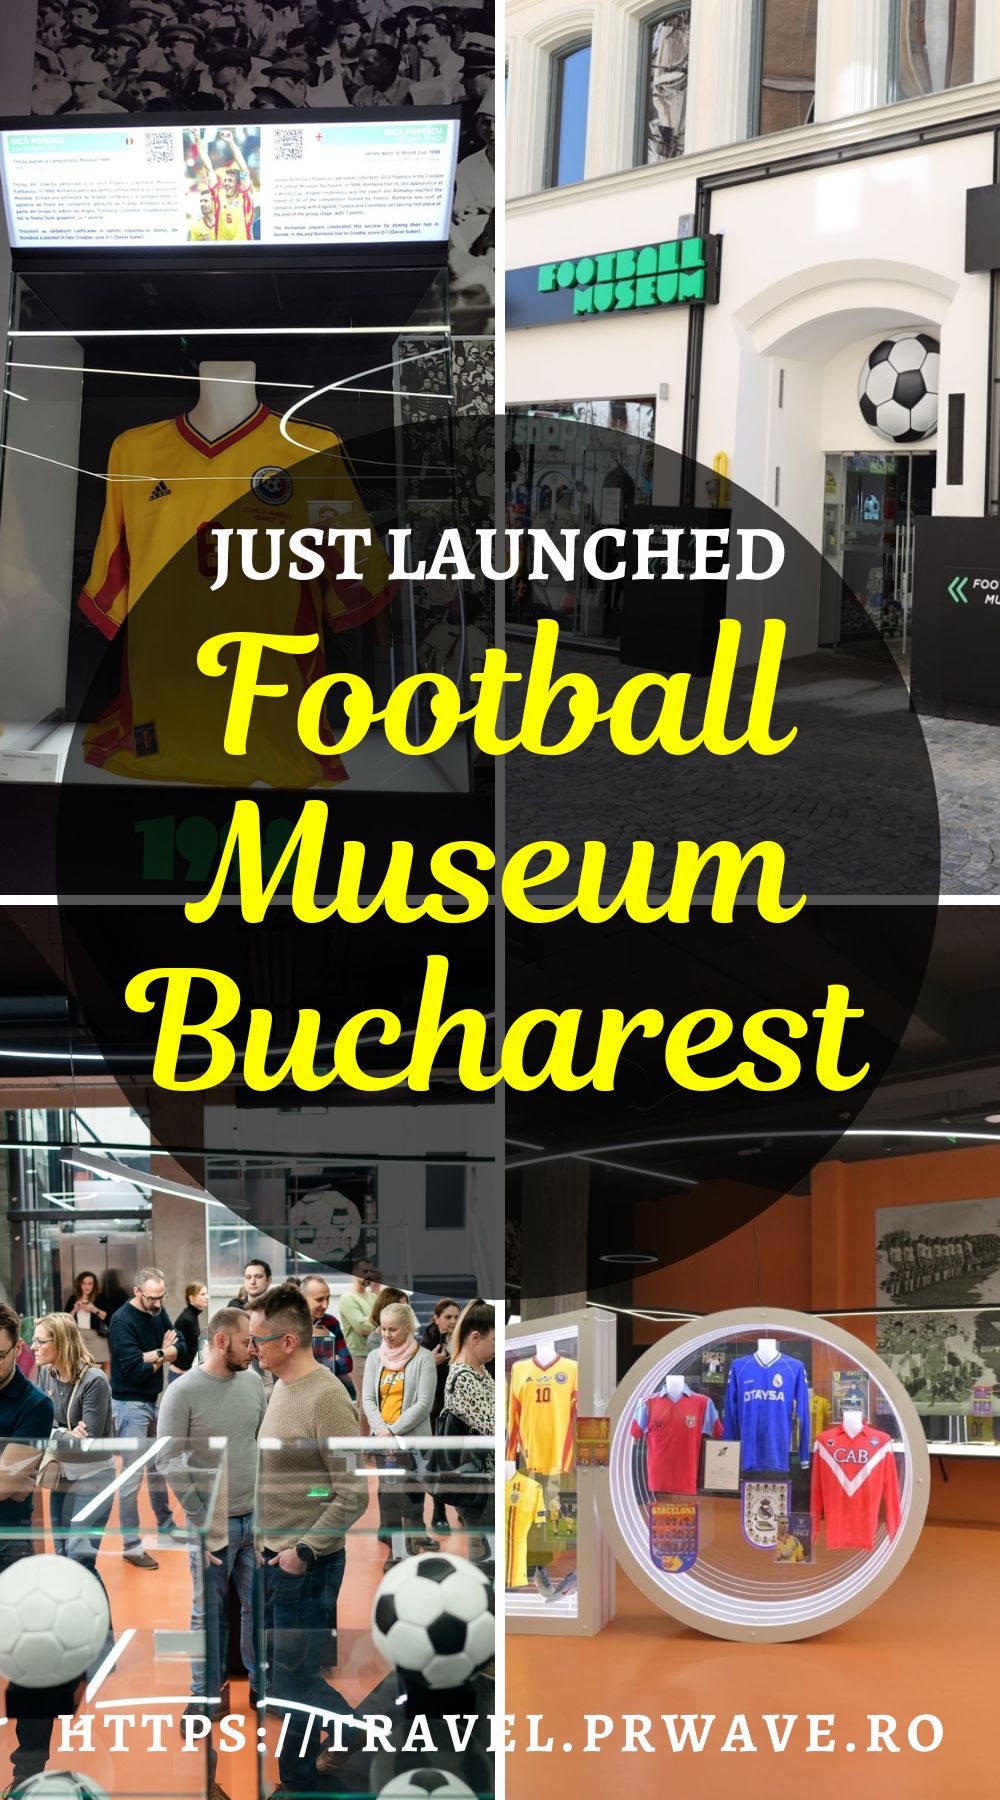 The complete guide to visiting the Football Museum Bucharest - one of the new things to do in Bucharest. Tips for visiting the first football museum in Eastern Europe. Discover the things to do at the Football Museum Bucharest #football #messi #maradona #hagi #football #museum #bucharest #romania #europe #museums #footballmuseum 